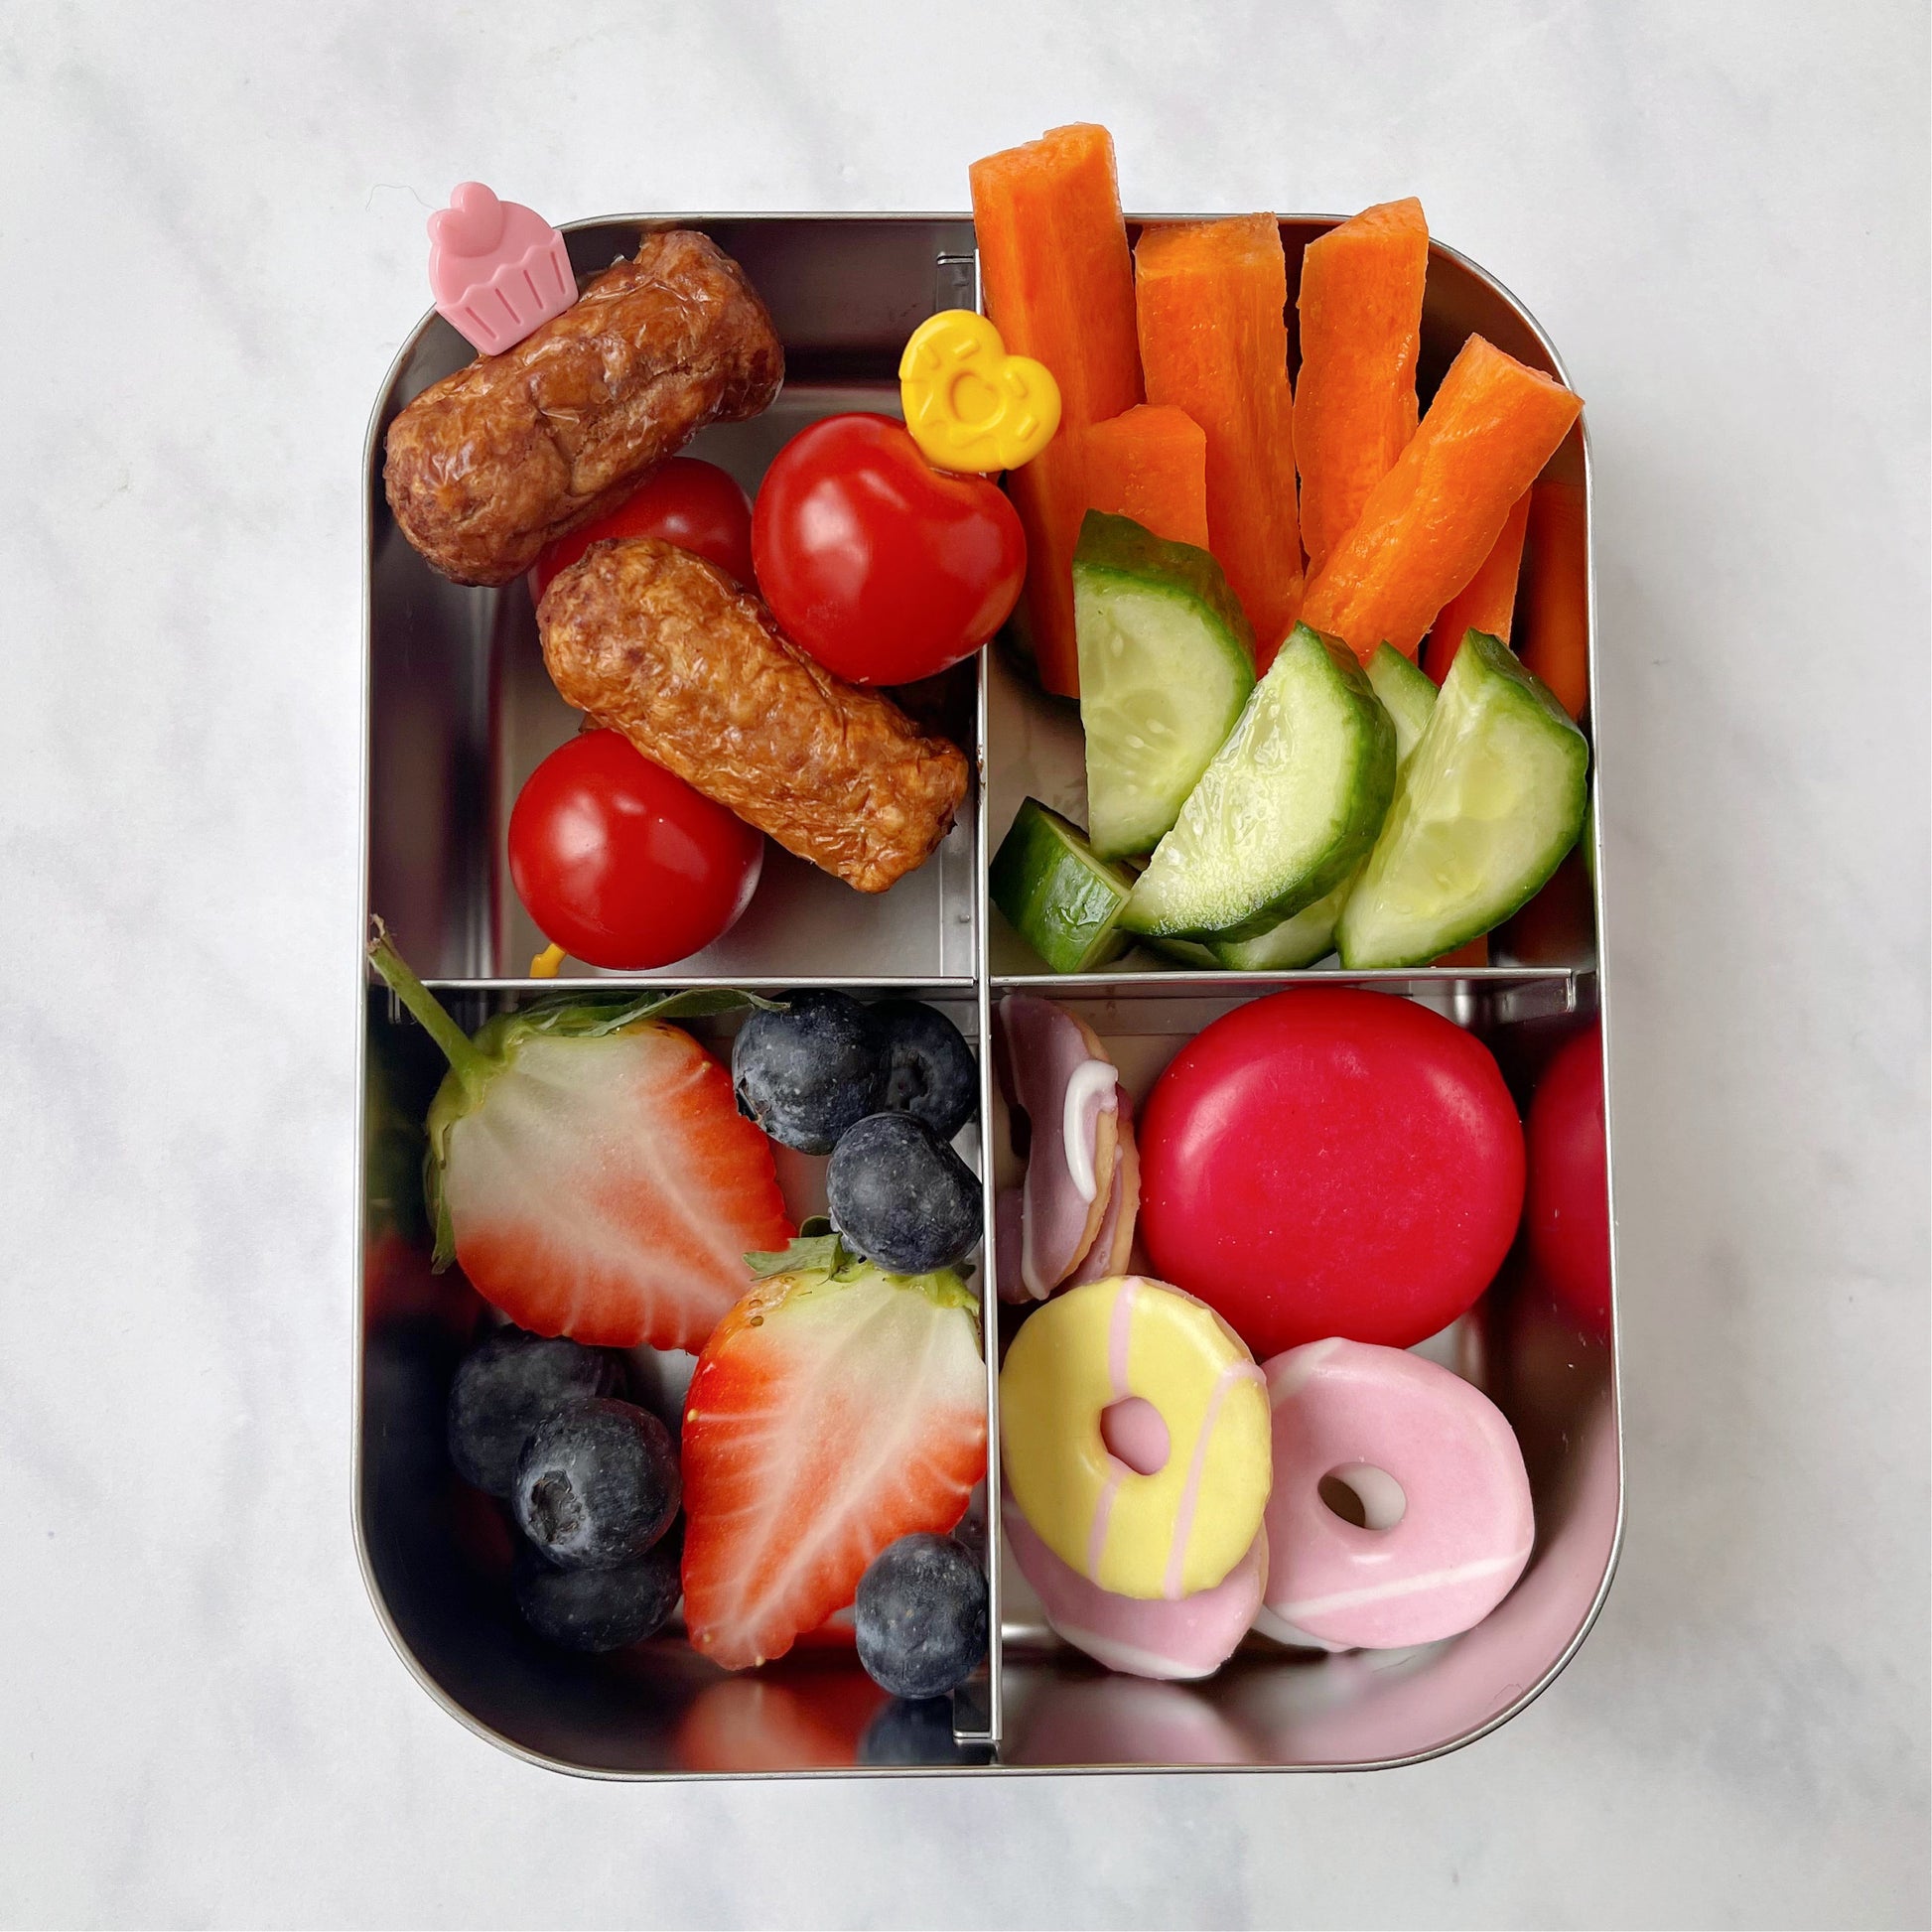 A pink and a yellow Pick Stick with a cocktail sausage and 2 cherry tomatoes on each kids skewer in a divided lunchbox with snacks and fresh fruit and veggies.